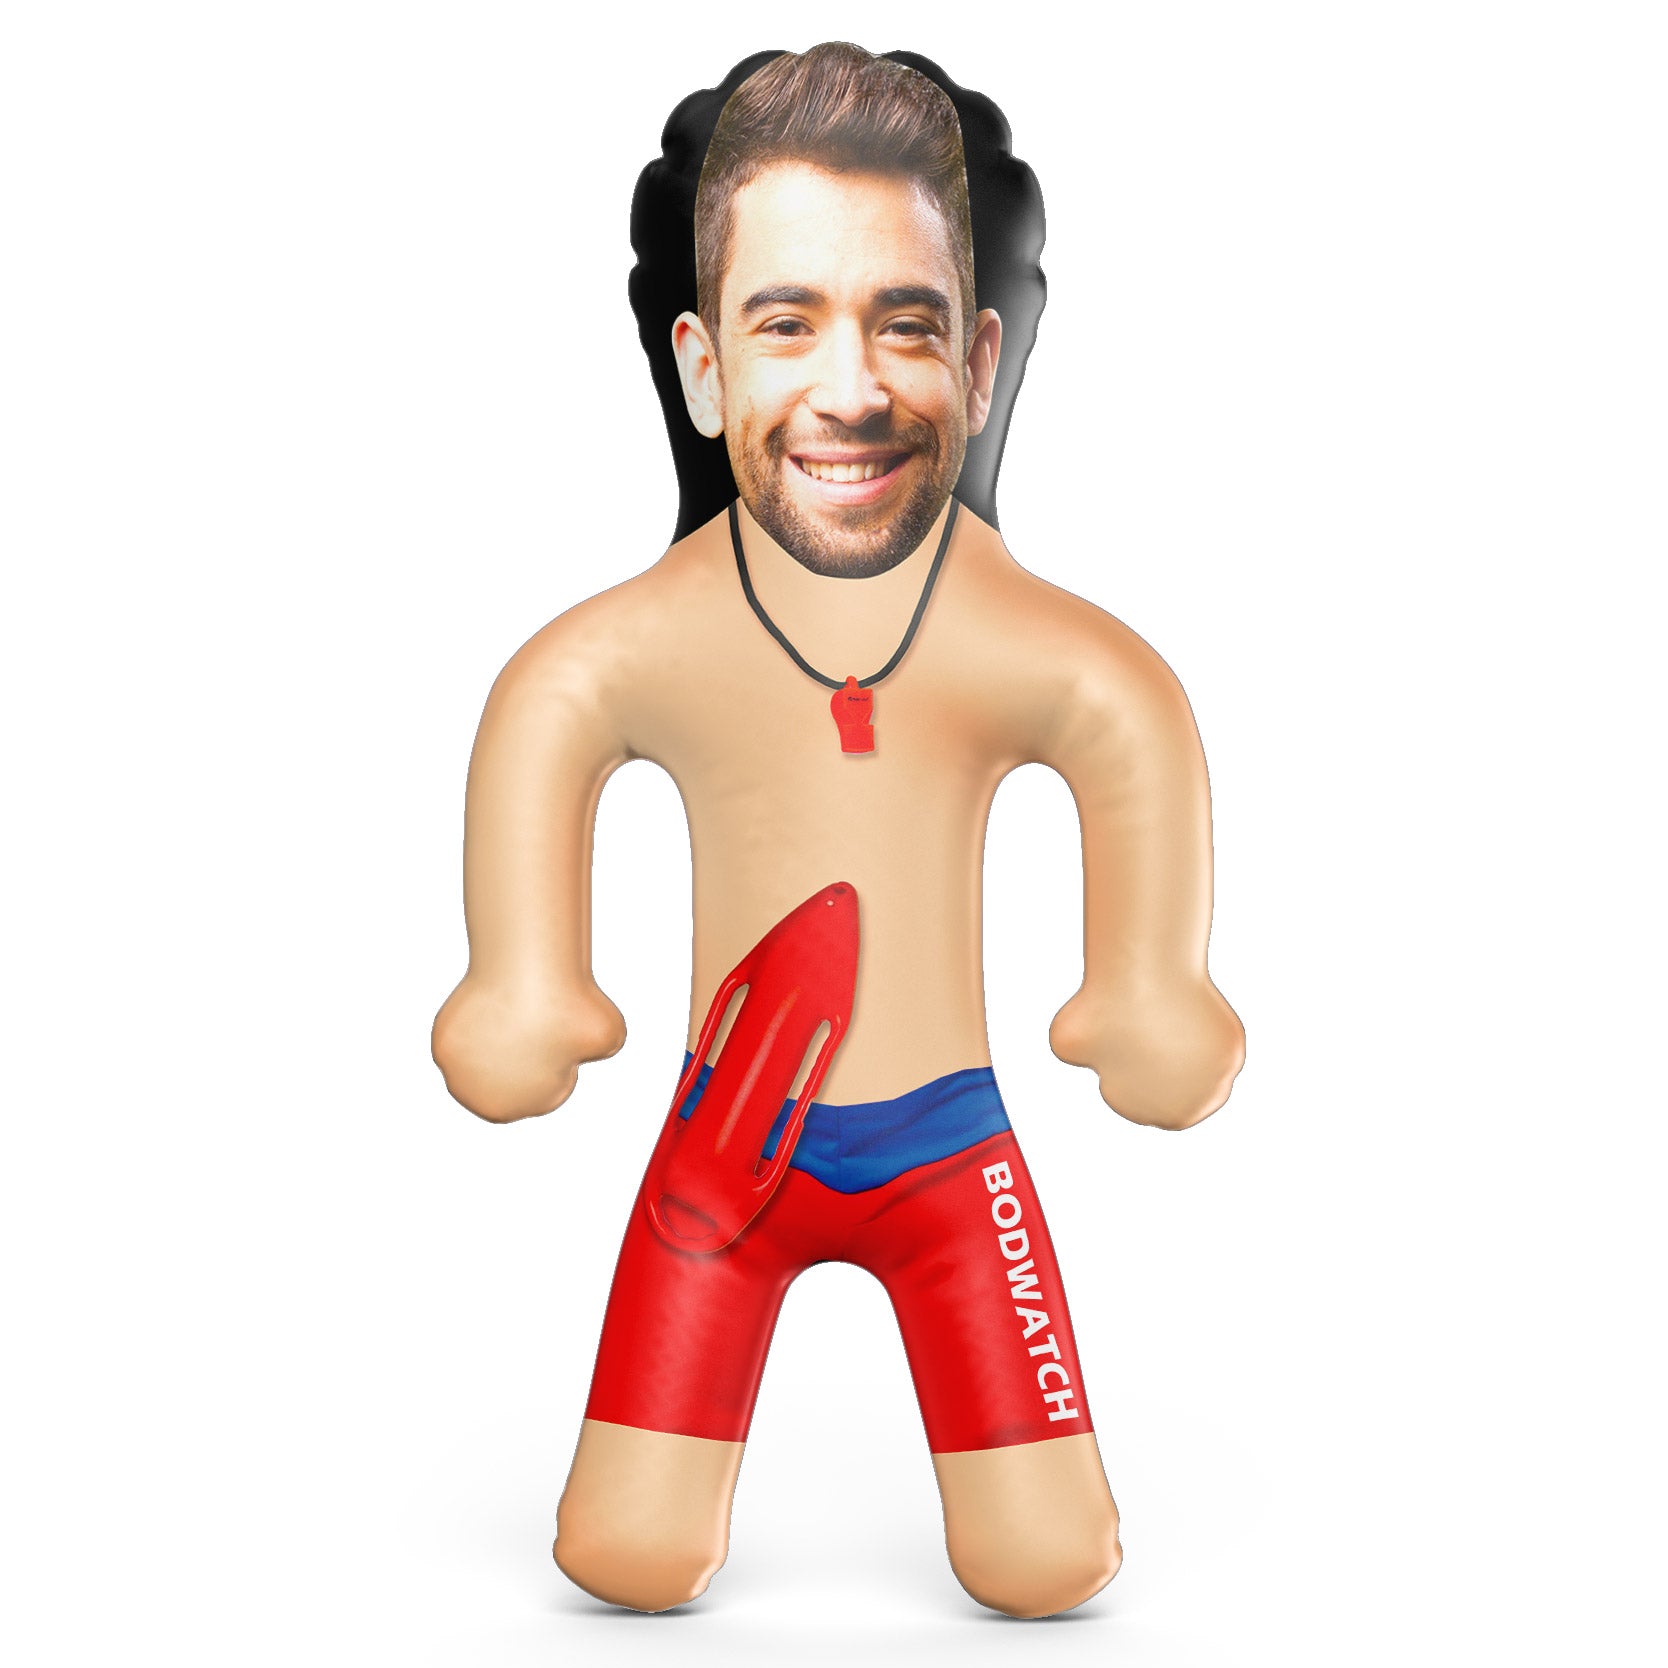 Bodwatch Man Inflatable Doll